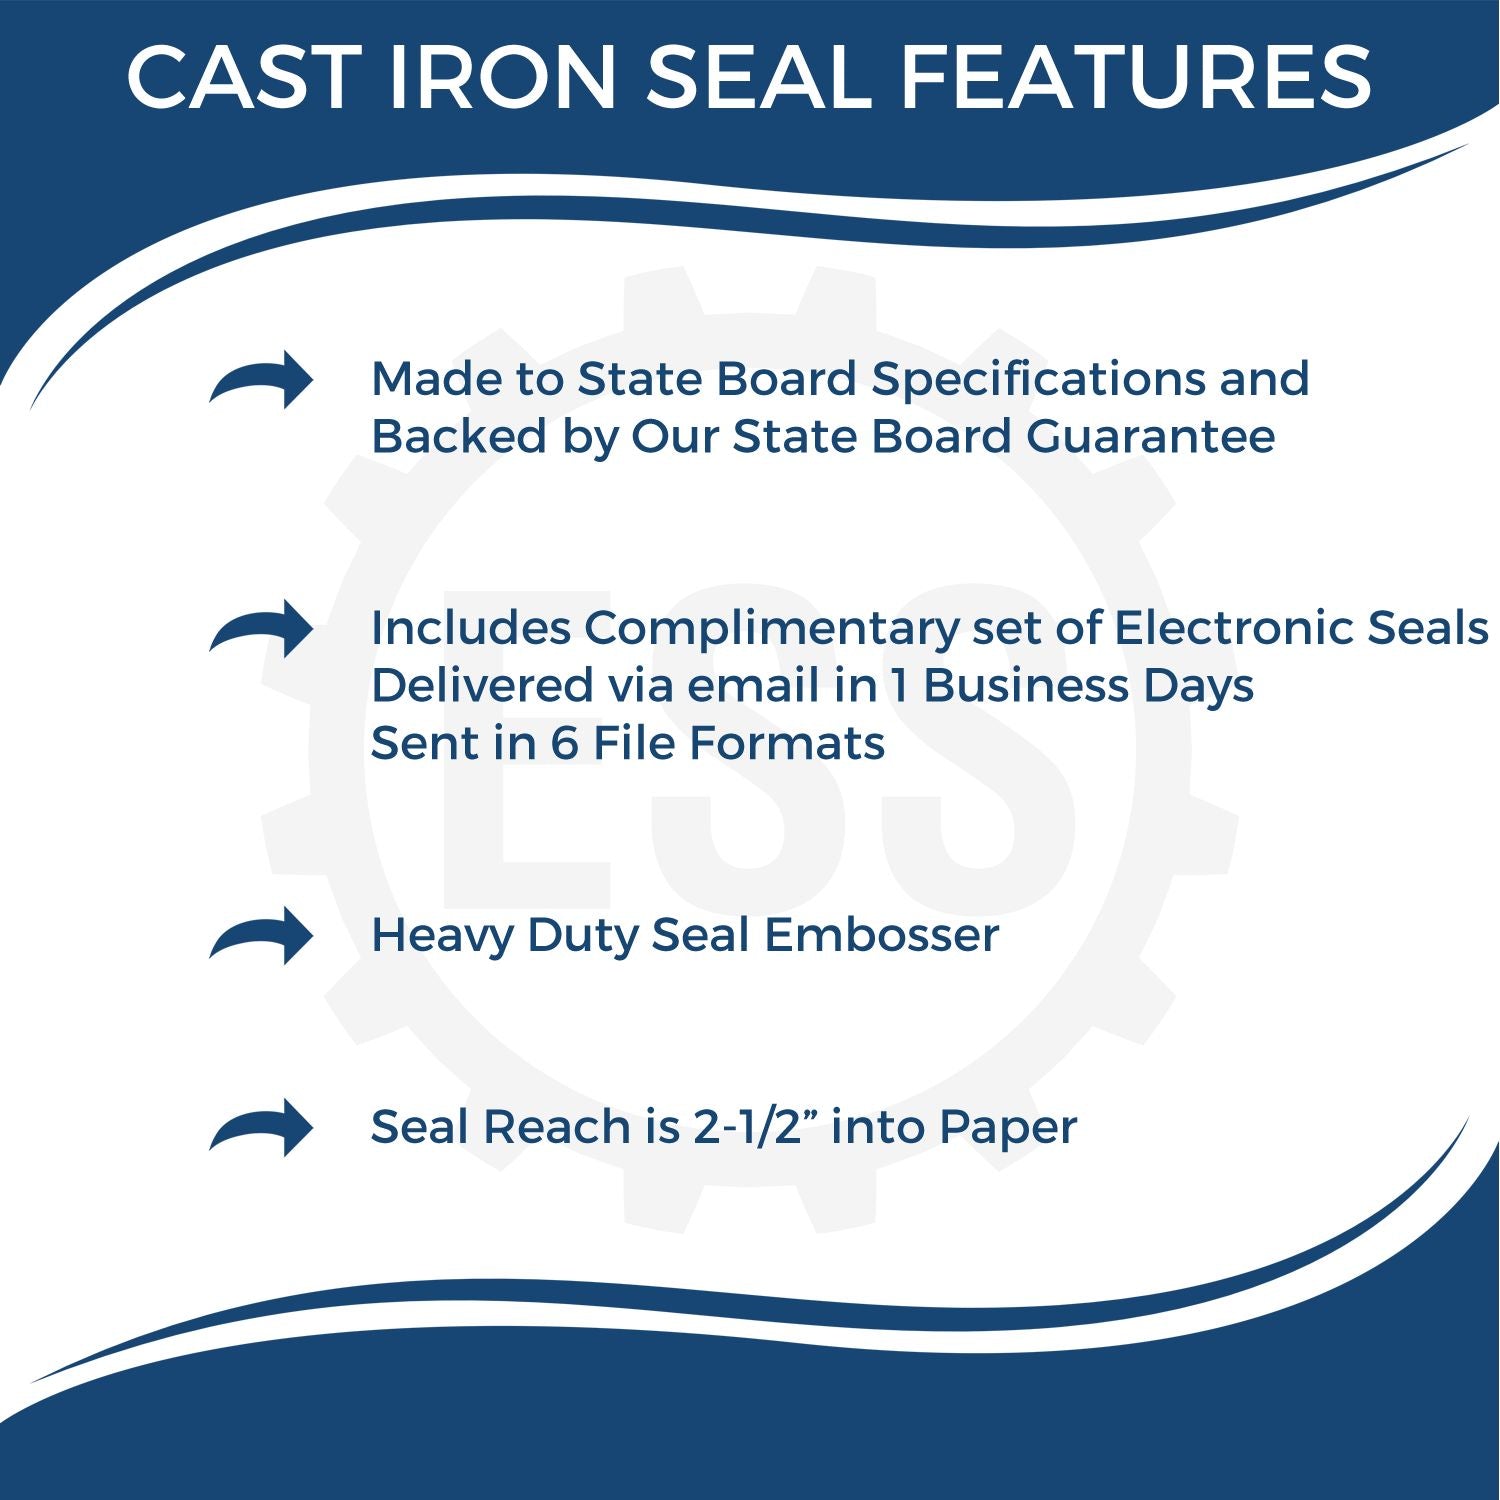 The main image for the Heavy Duty Cast Iron Virginia Engineer Seal Embosser depicting a sample of the imprint and electronic files